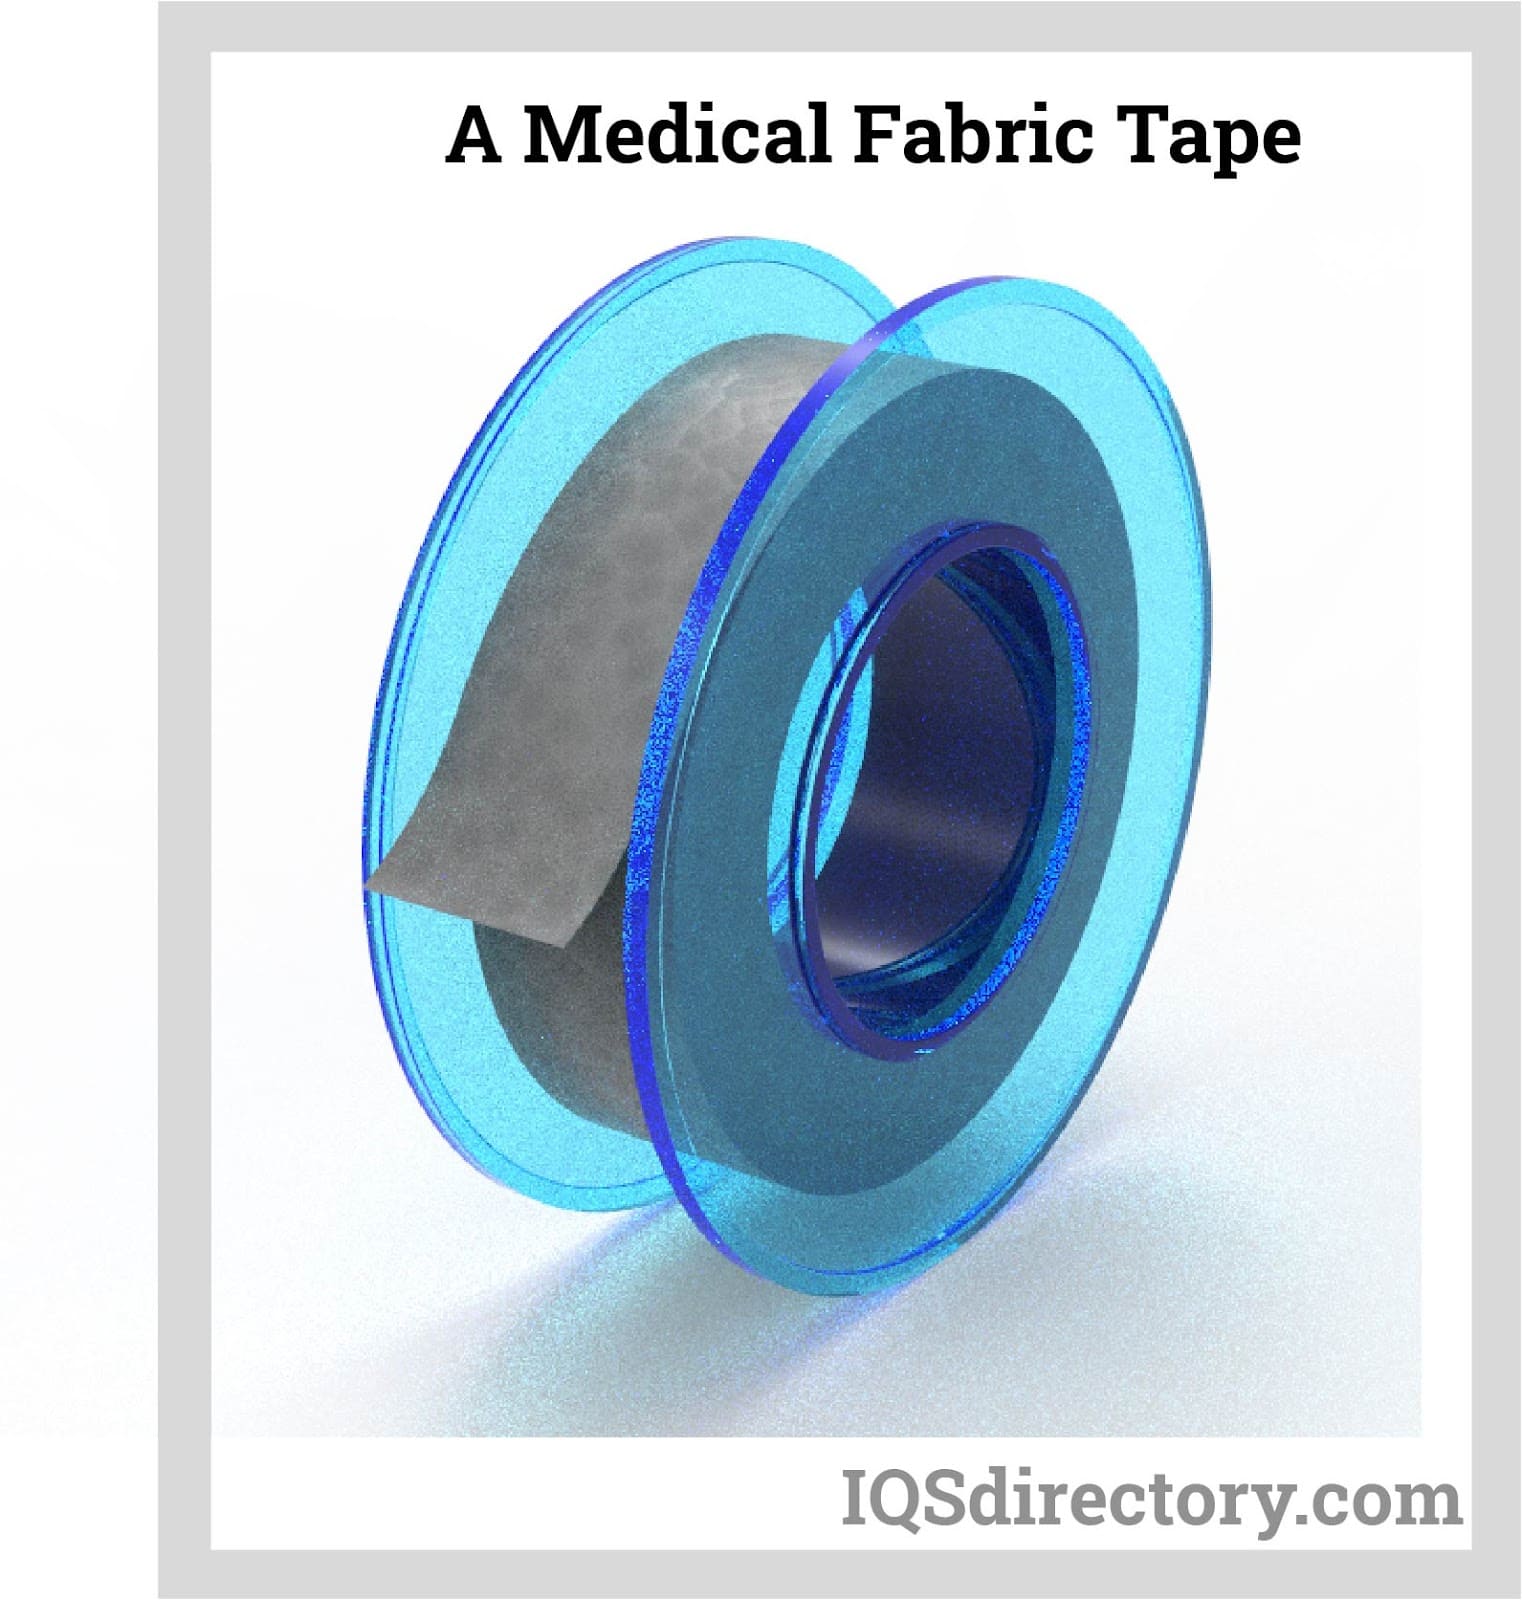 A Medical Fabric Tape